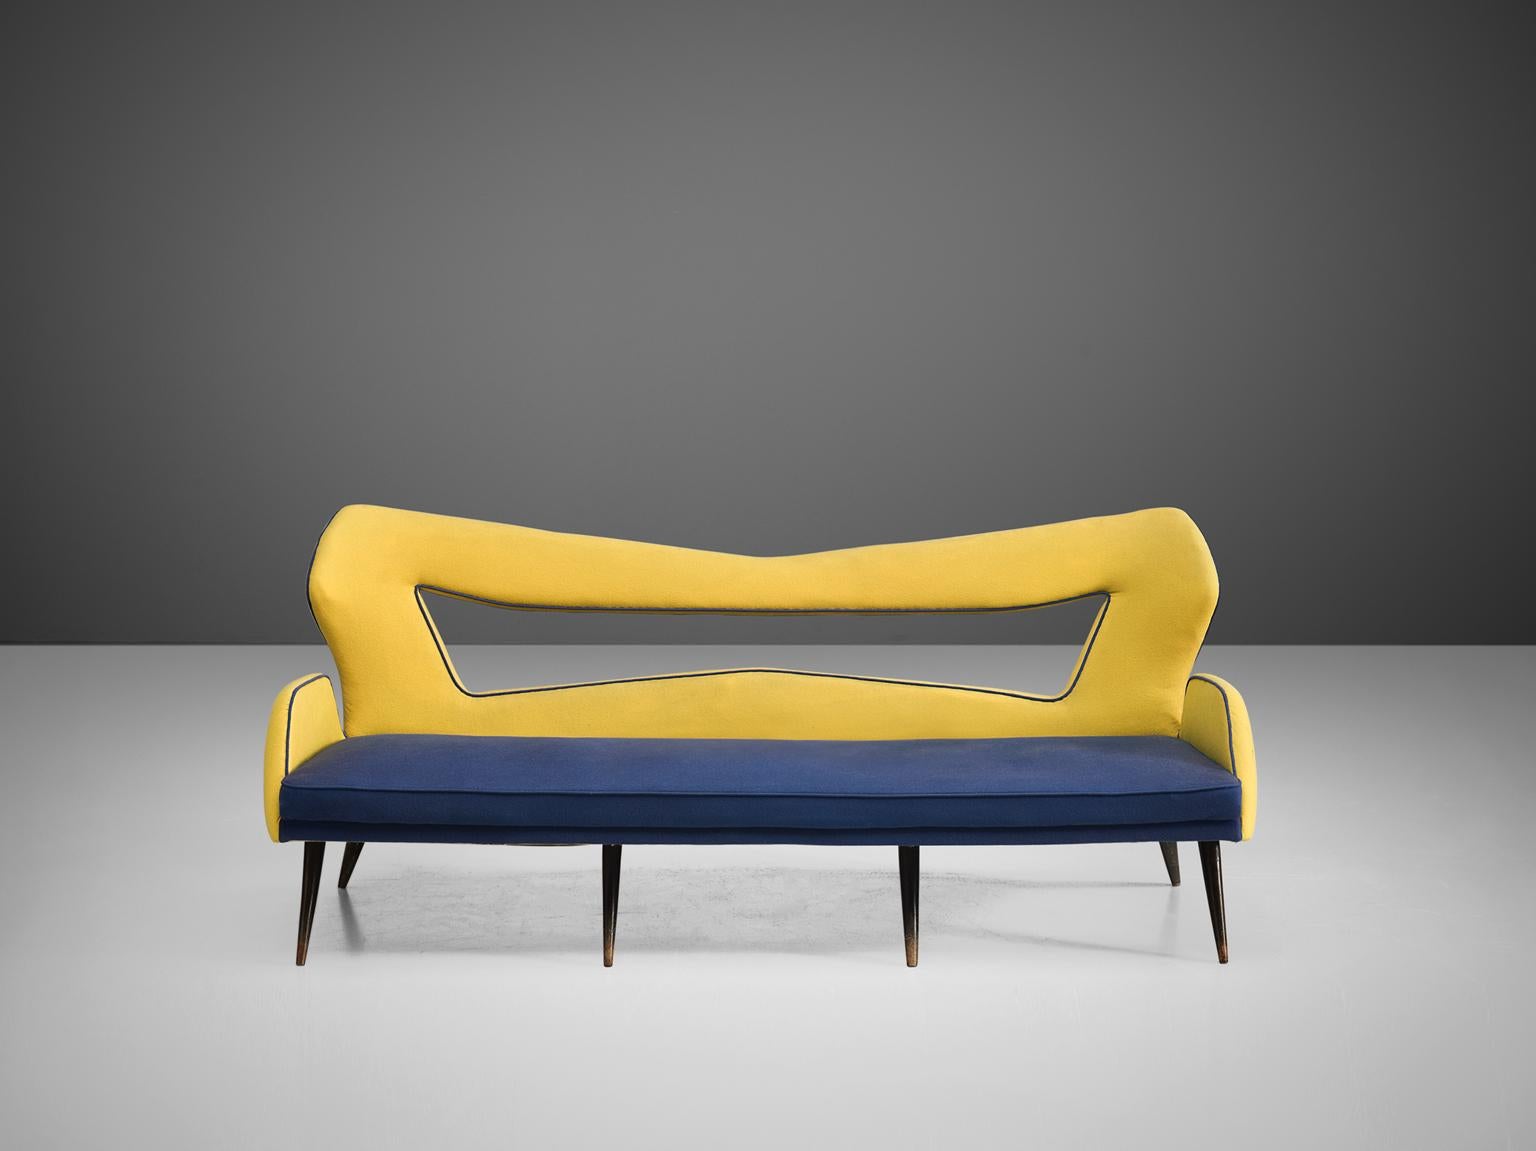 Sofa, blue and yellow upholstery, wooden legs, Italy, 1970s.

This settee is extraordinary in its playfulness and color scheme. The sofa features four wooden tapered, diagonal legs. The seat, upholstered in marine blue upholstery, is thick and